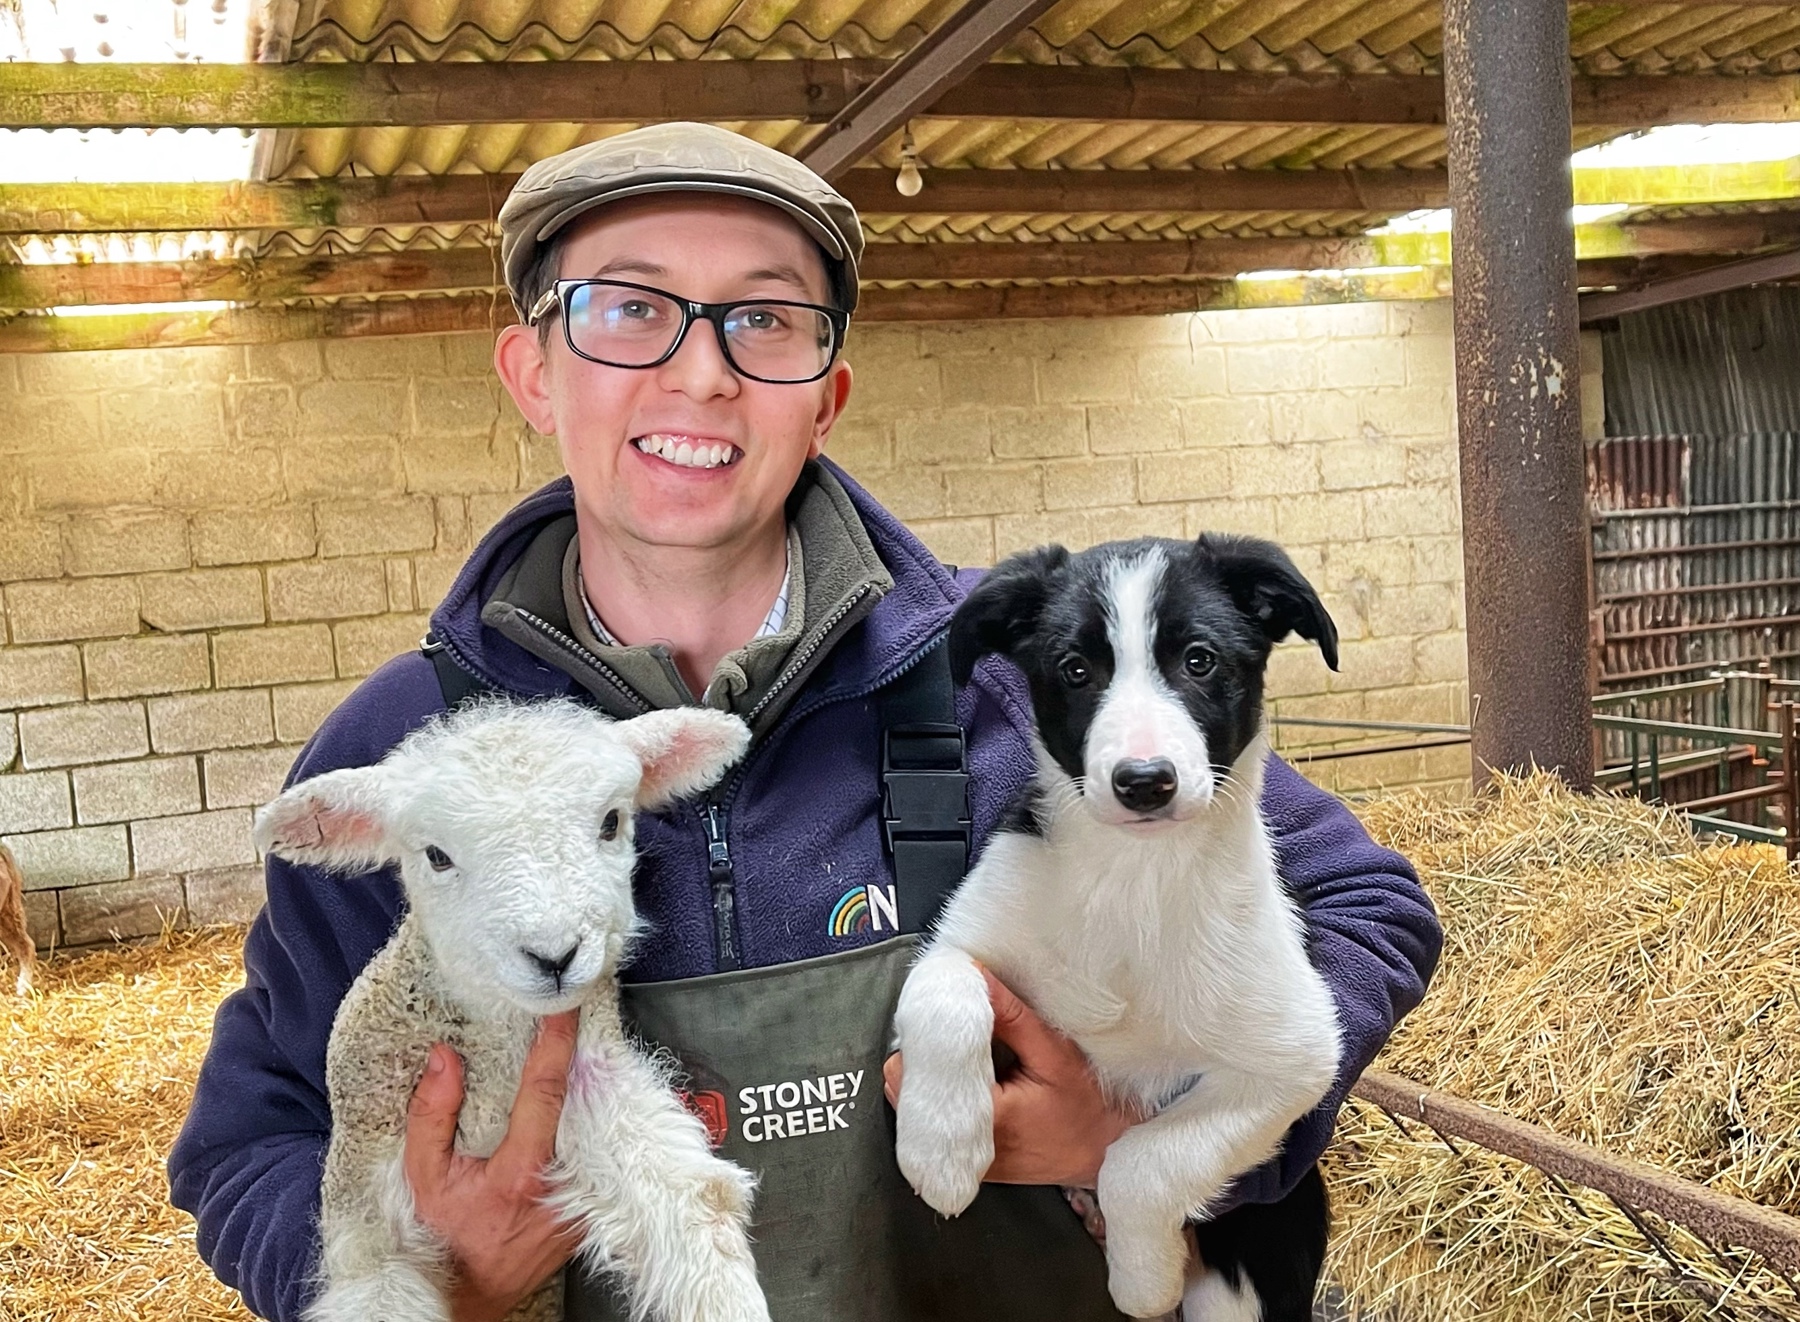 Karl Franklin, a farmer, is holding a lamb in his right hand and a black and white sheep dog in his left hand, and is looking at the camera smiling. He's wearing a flat cap and glasses and is stood in a lambing shed filled with hay.